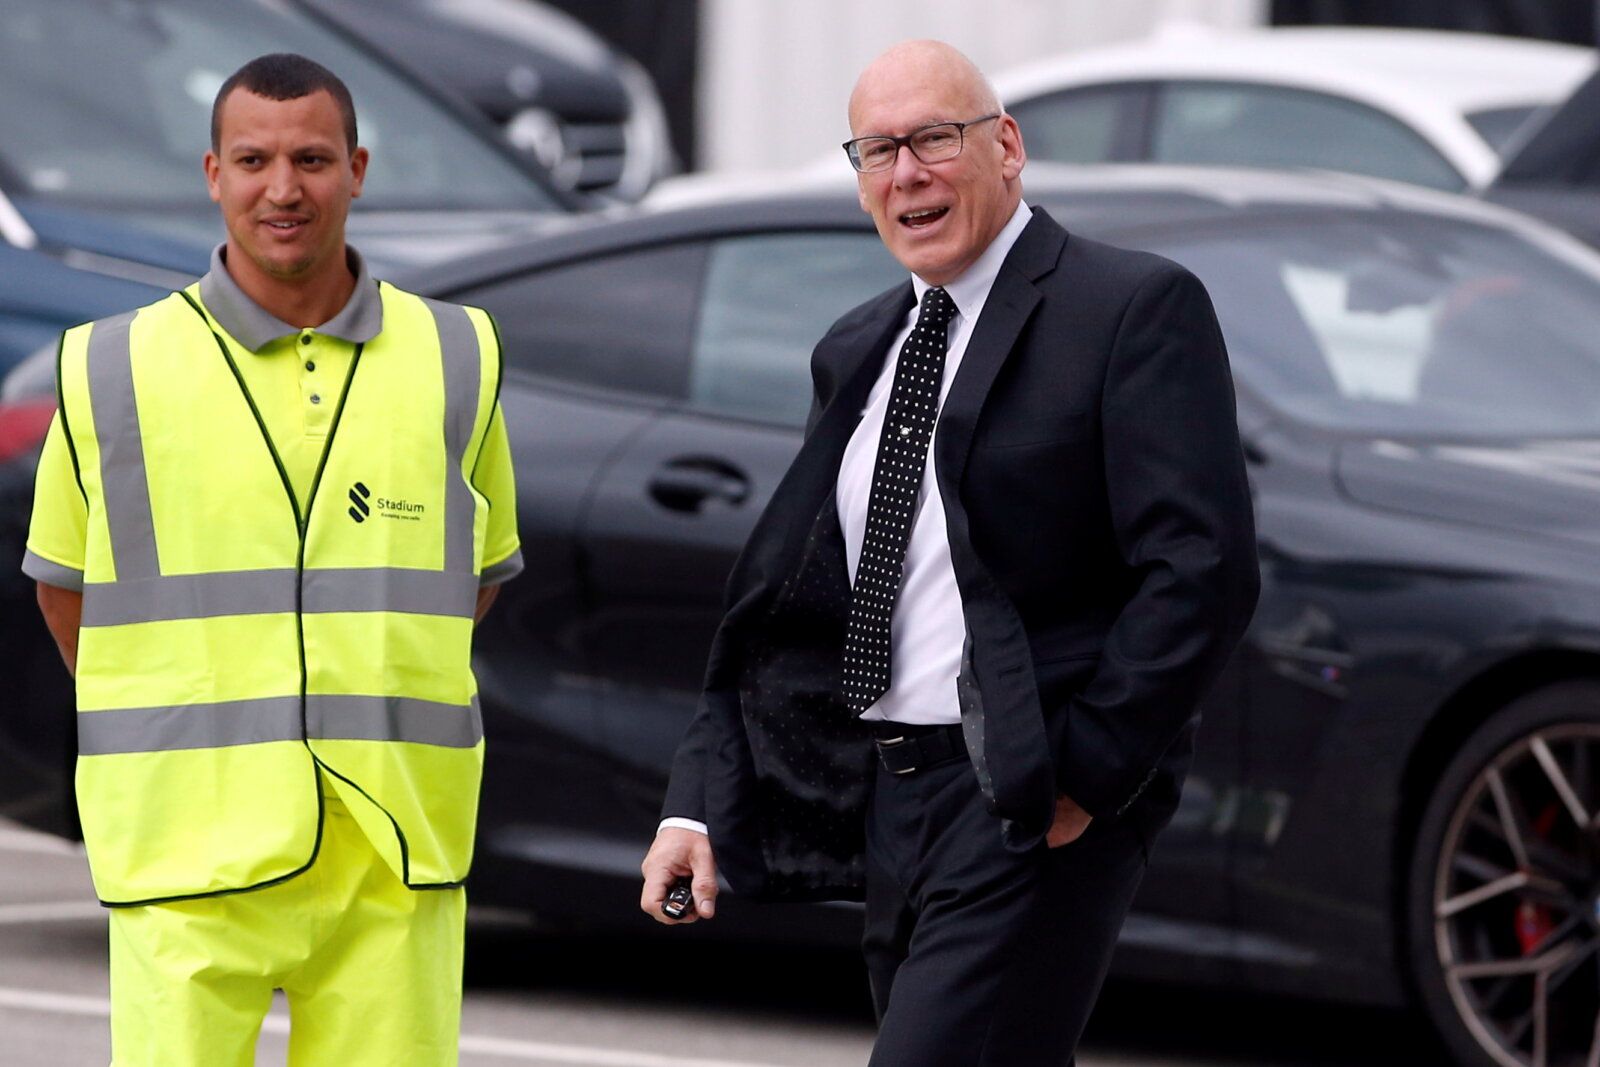 Soccer Football - Championship - Derby County v Huddersfield Town - Pride Park, Derby, Britain - August 7, 2021 Derby County Chairman Mel Morris arrives at the stadium ahead of the match  Action Images/Craig Brough